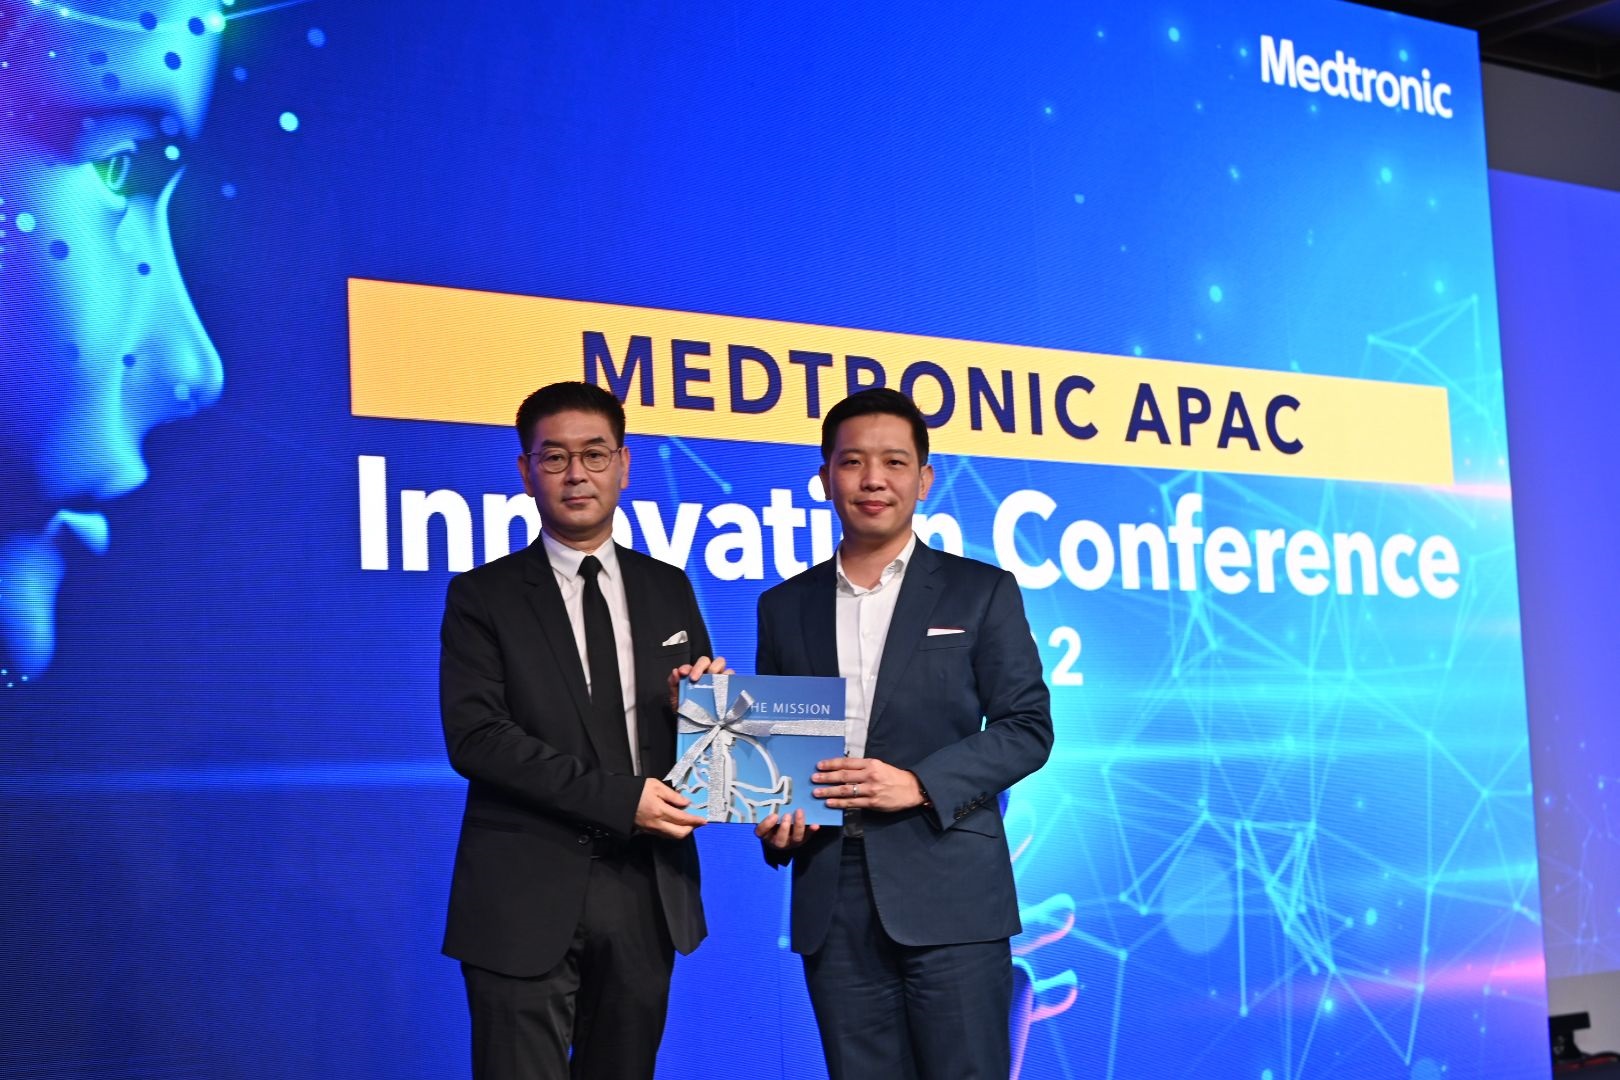 (L-R) Chris Lee, President of Medtronic APAC, presents the Medtronic Mission Book to Minister of State for Trade and Industry Alvin Tan at the Medtronic APAC Innovation Conference.